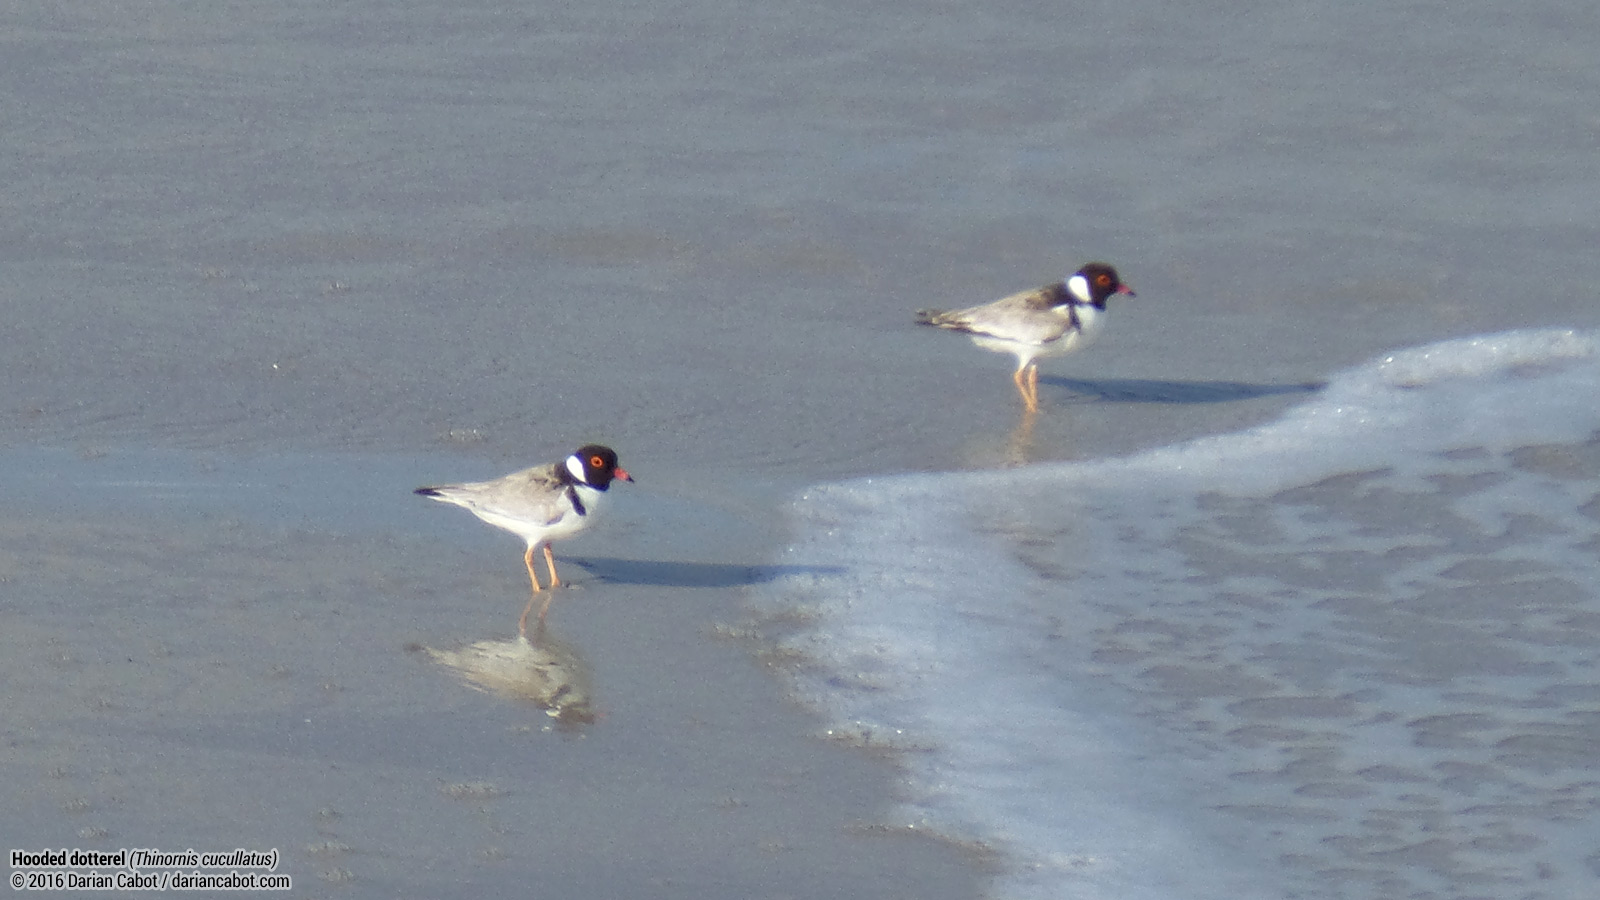 Hooded dotterel or hooded plover (Thinornis cucullatus)